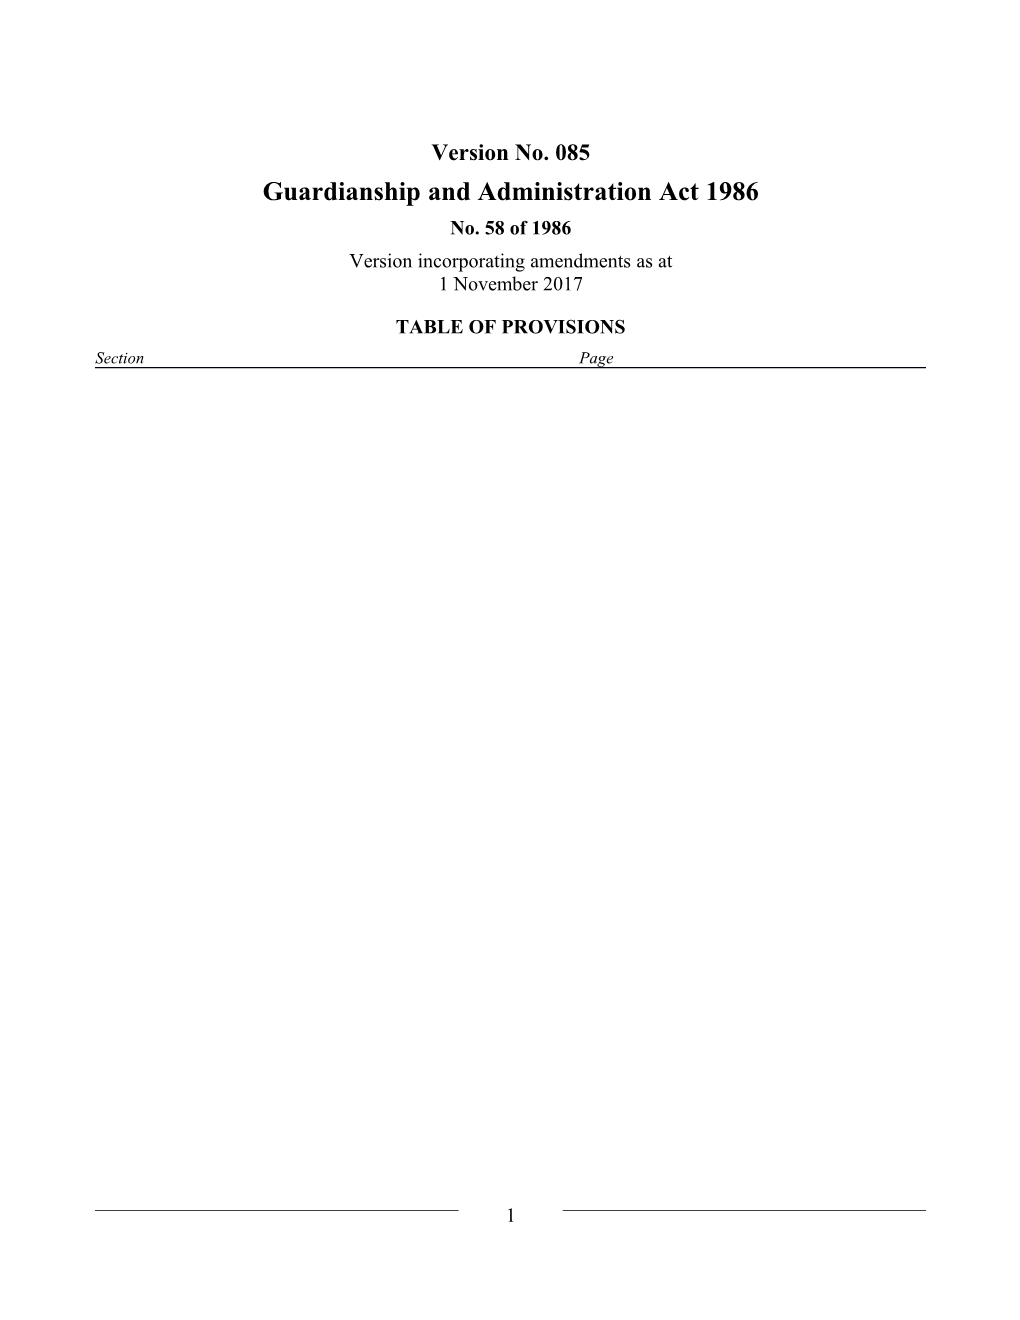 Guardianship and Administration Act 1986